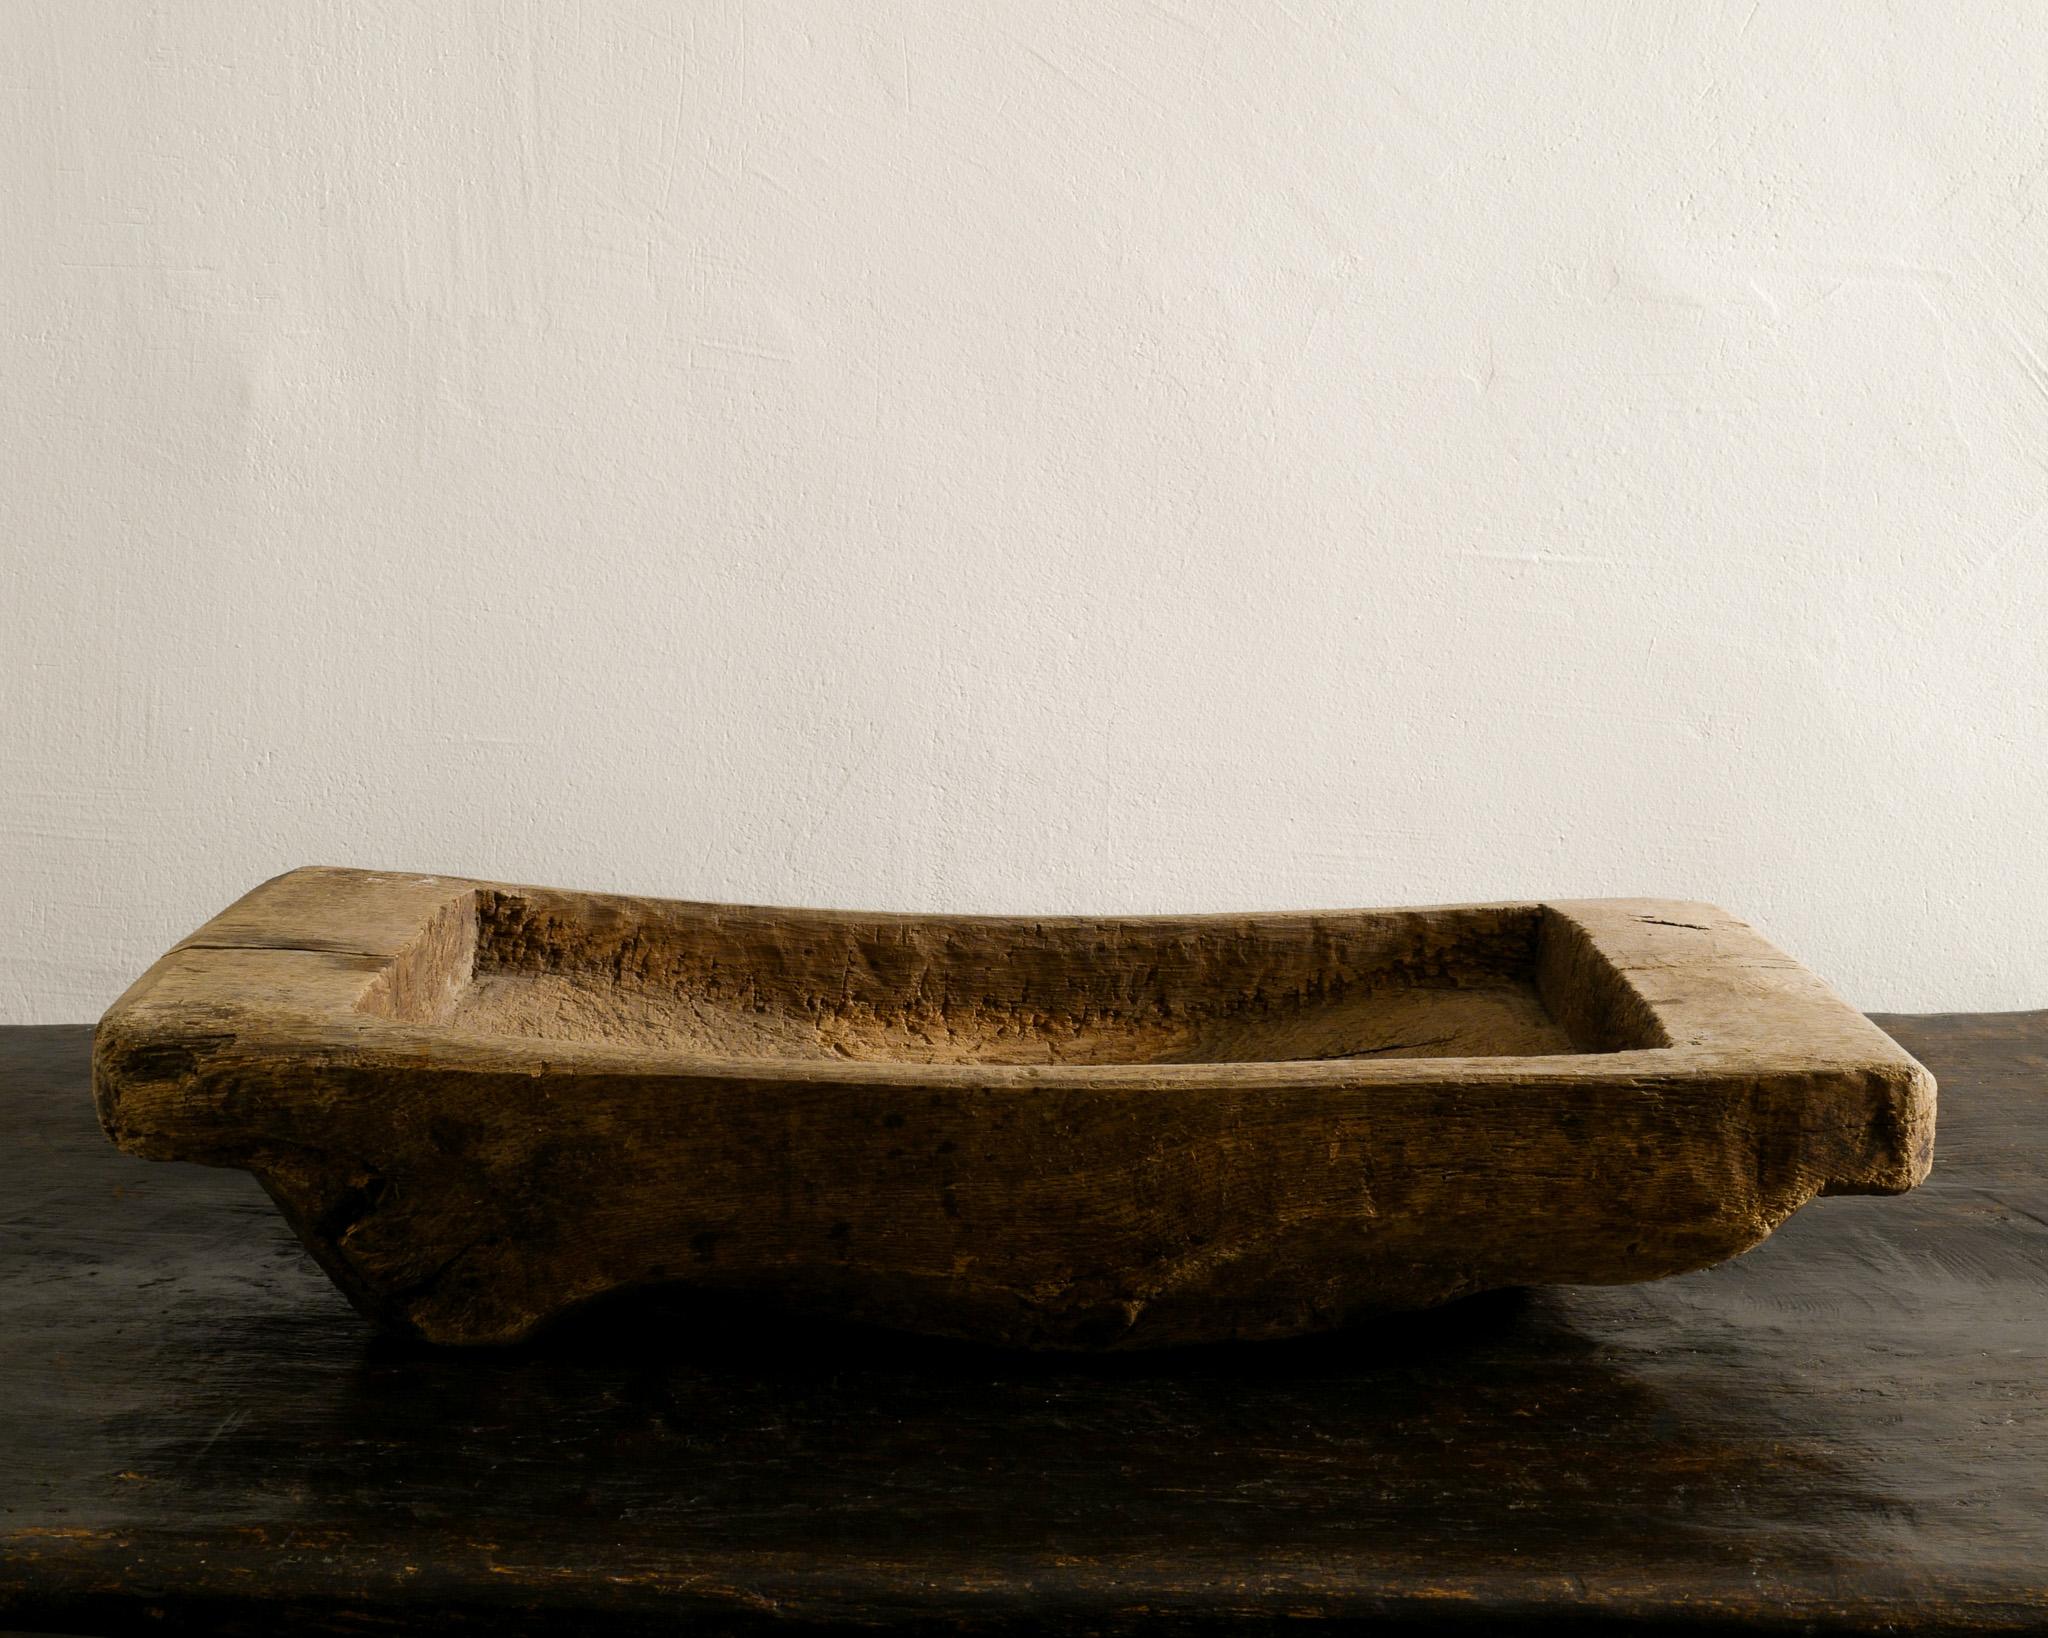 Rare antique wooden tray / bowl in hand carved oak with some free form details produced in Sweden in the early 1900s. In good original condition. 

Dimensions: H: 12 cm / 4.75